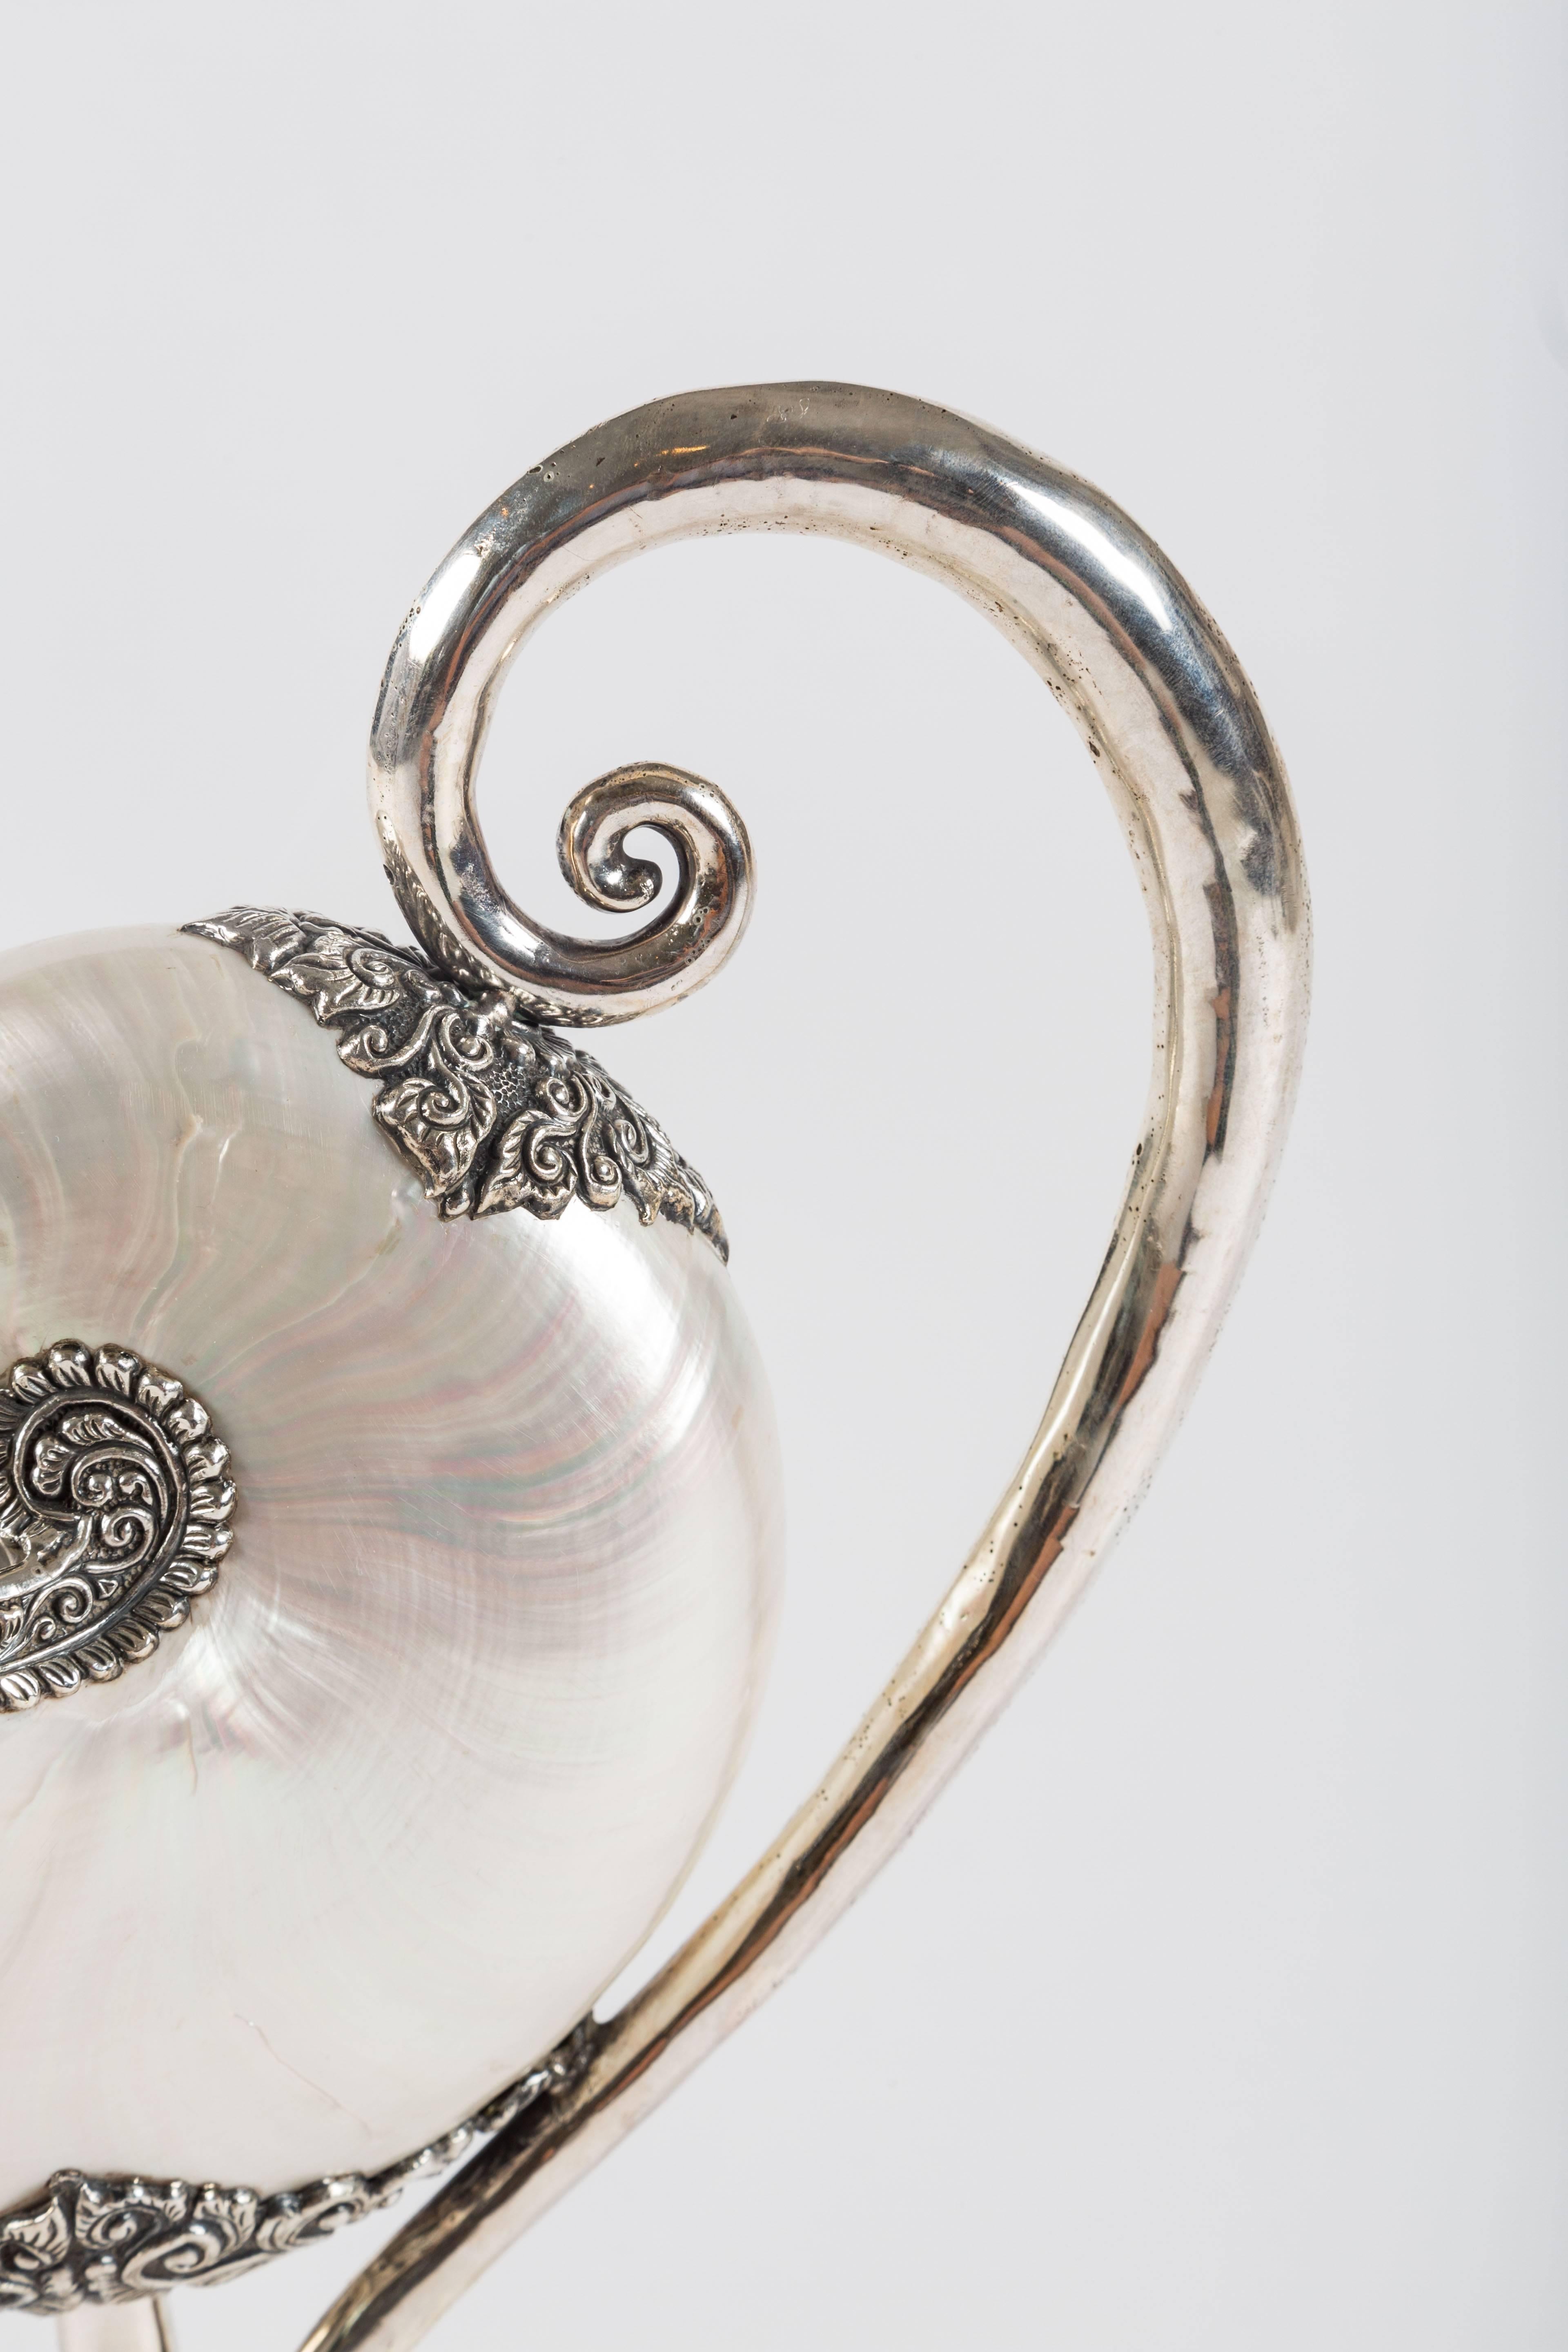 Shell Fantastic Indonesian Sterling and Nautilus Centerpiece by Jean-Francois Fichot